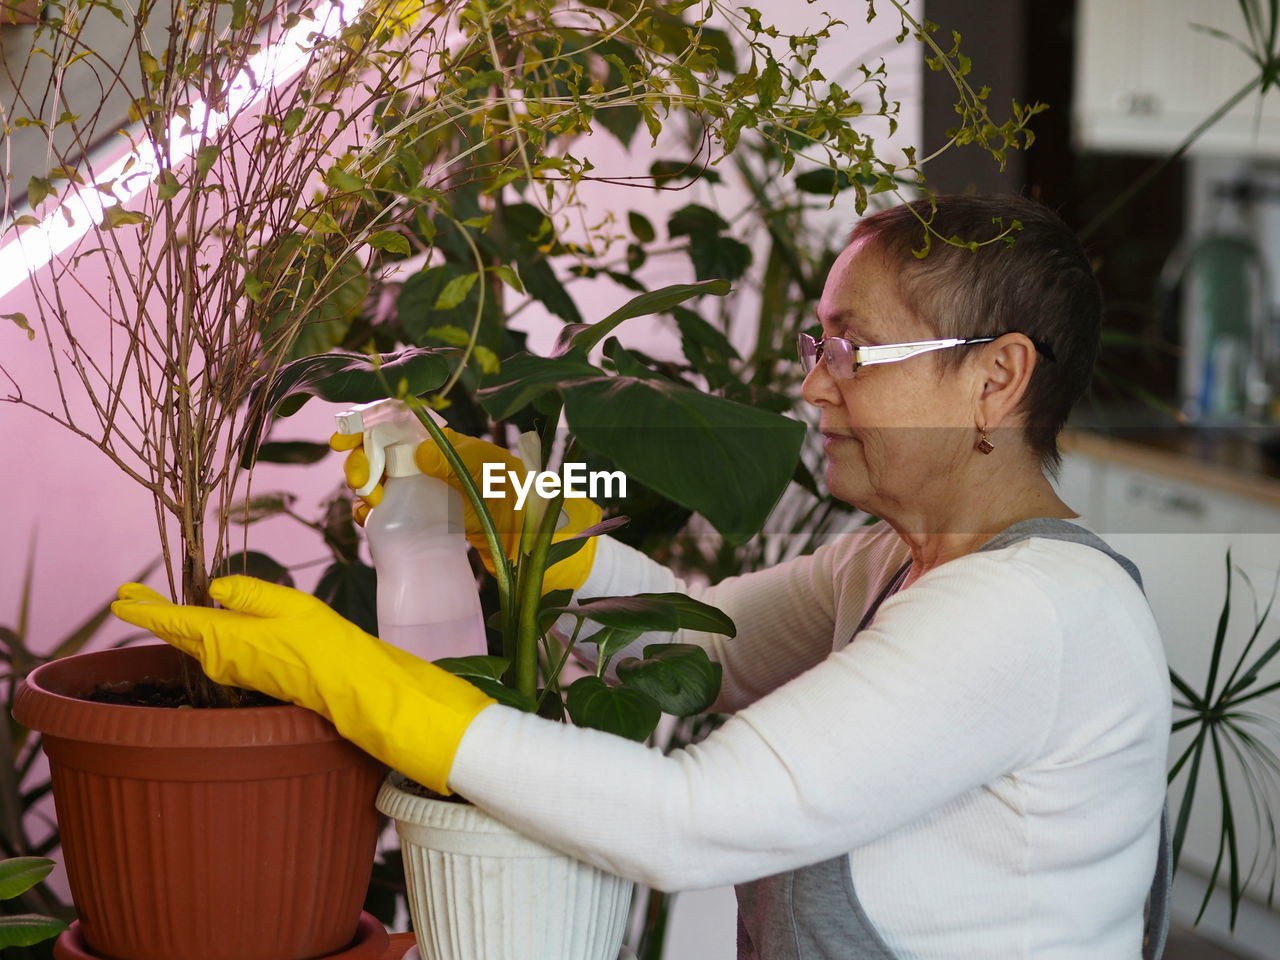 Side view of woman spraying water on plants